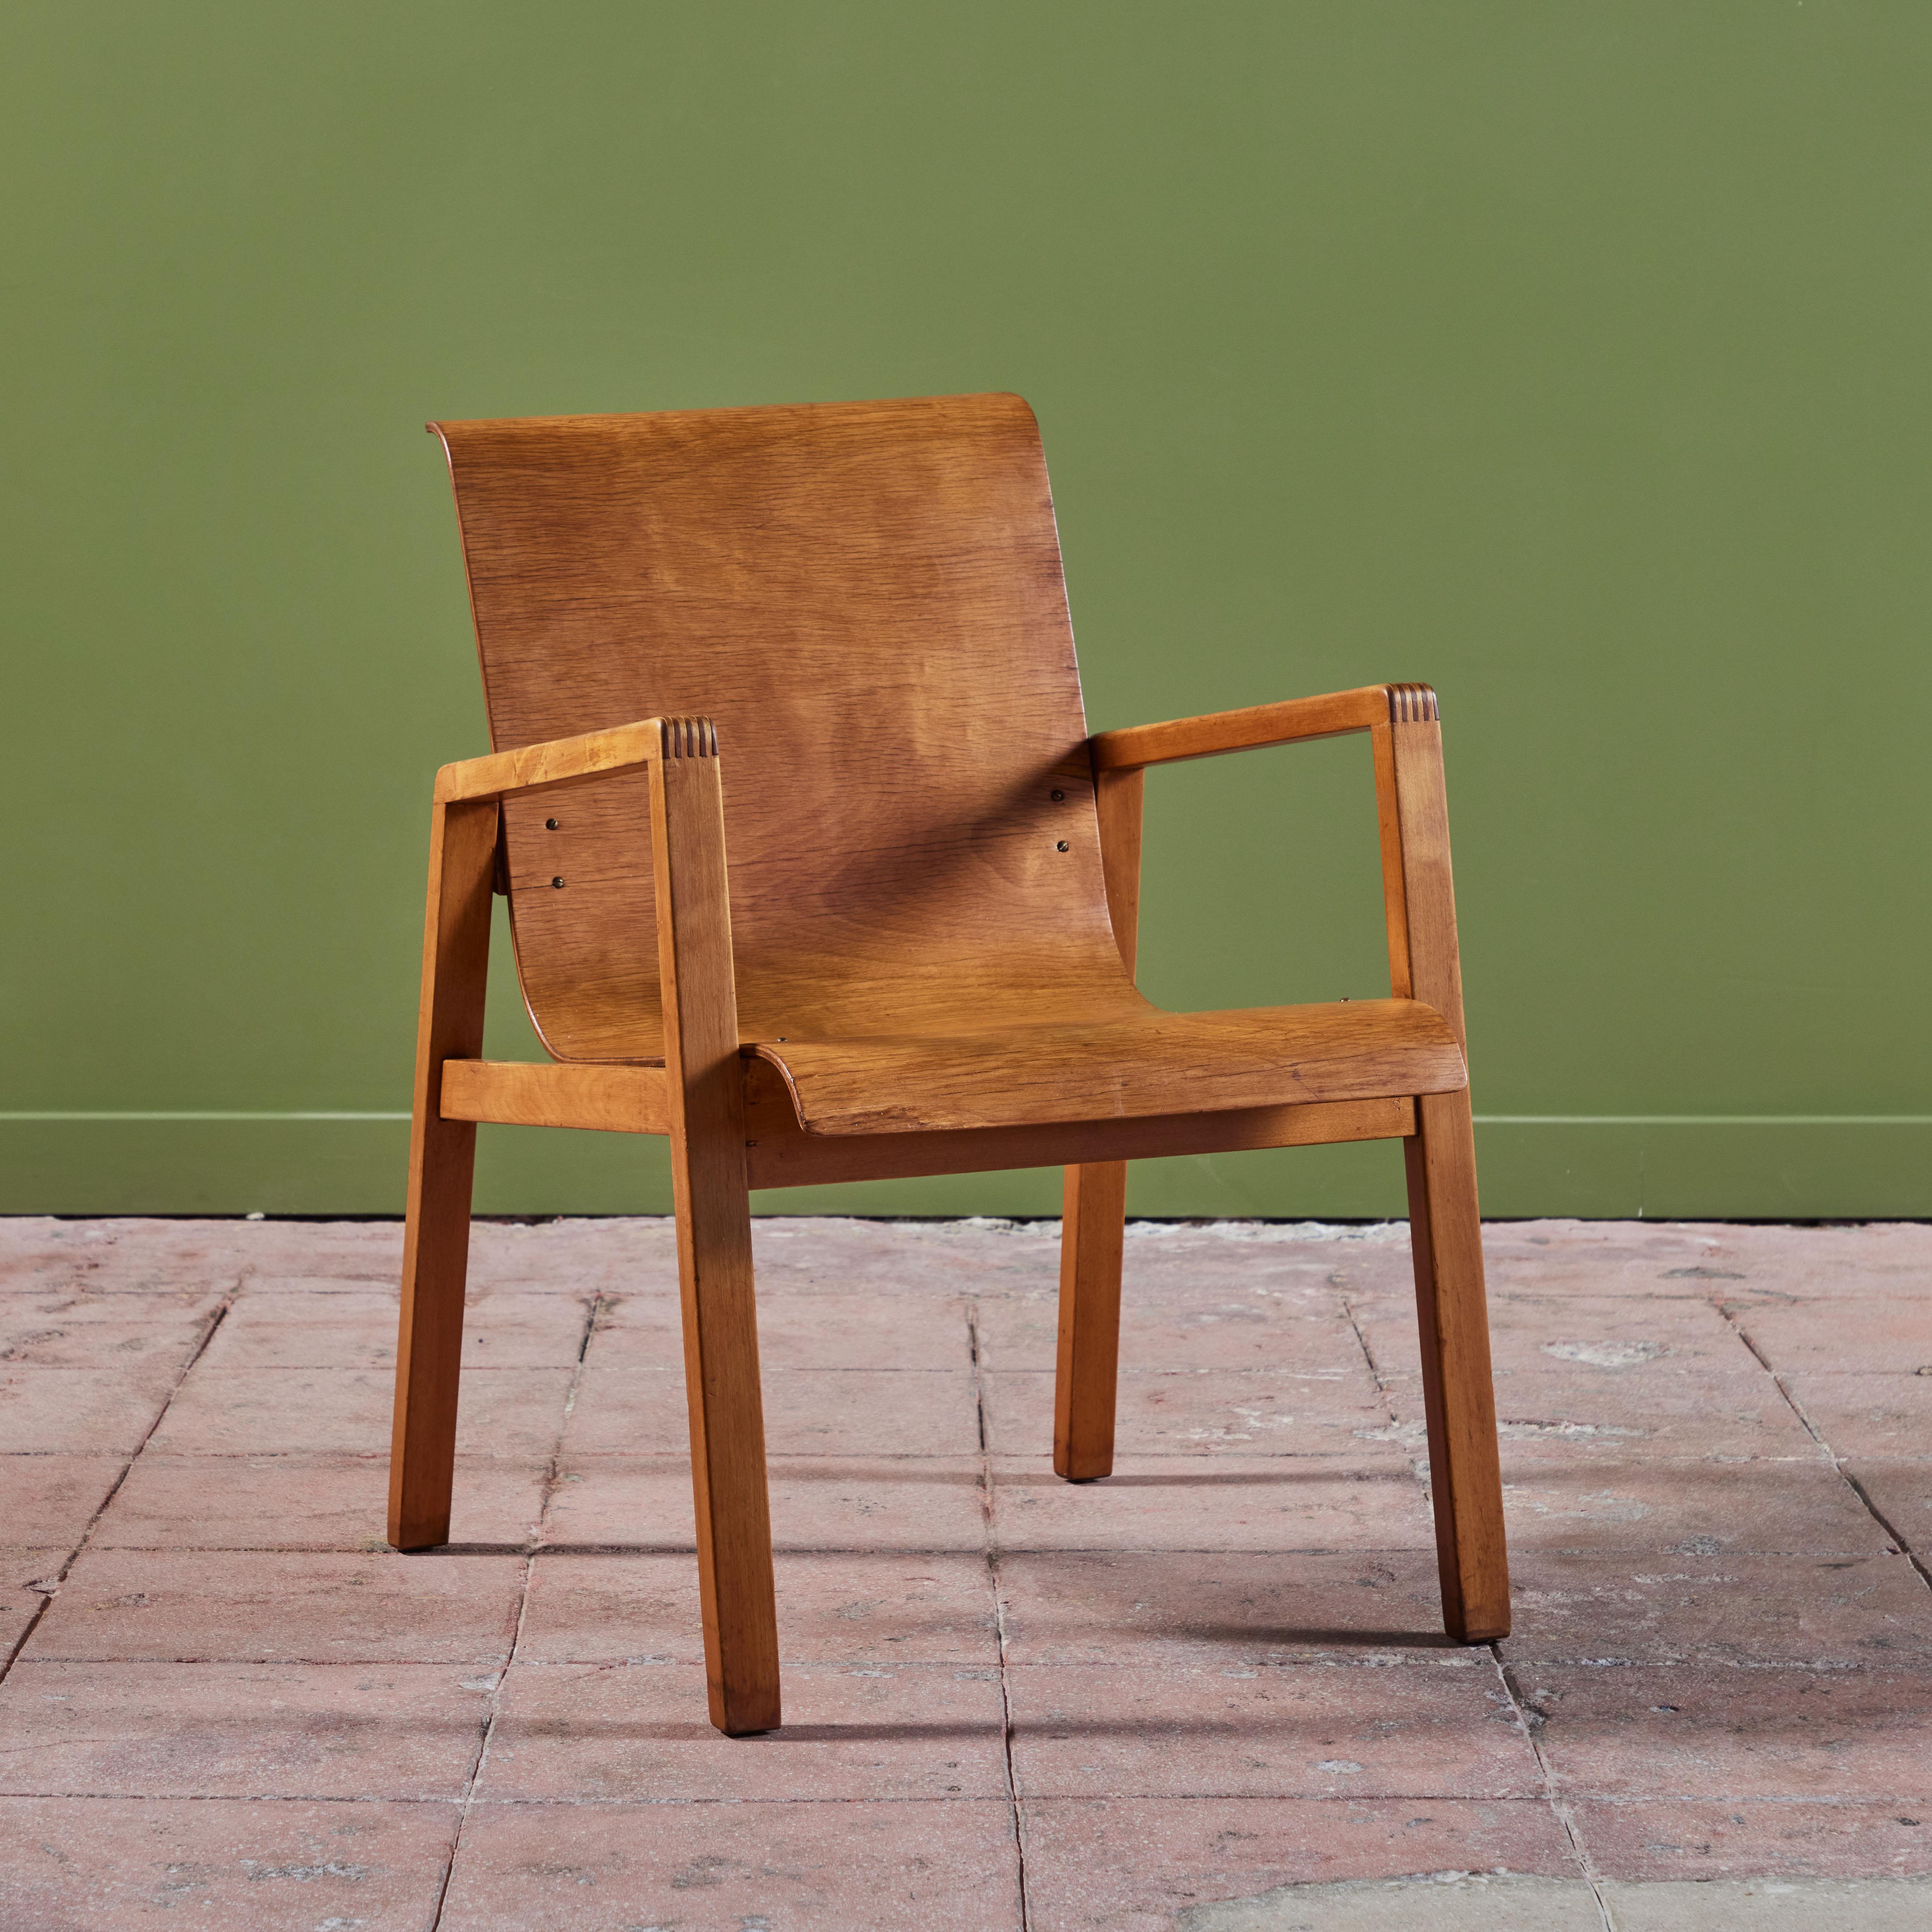 Finmar Model 403 'Hallway' chairs designed by Alvar Aalto and produced from 1930 through 1950 in Finland. The chair features a honey toned birch wood with bent plywood seat and backrest.

Dimensions
21